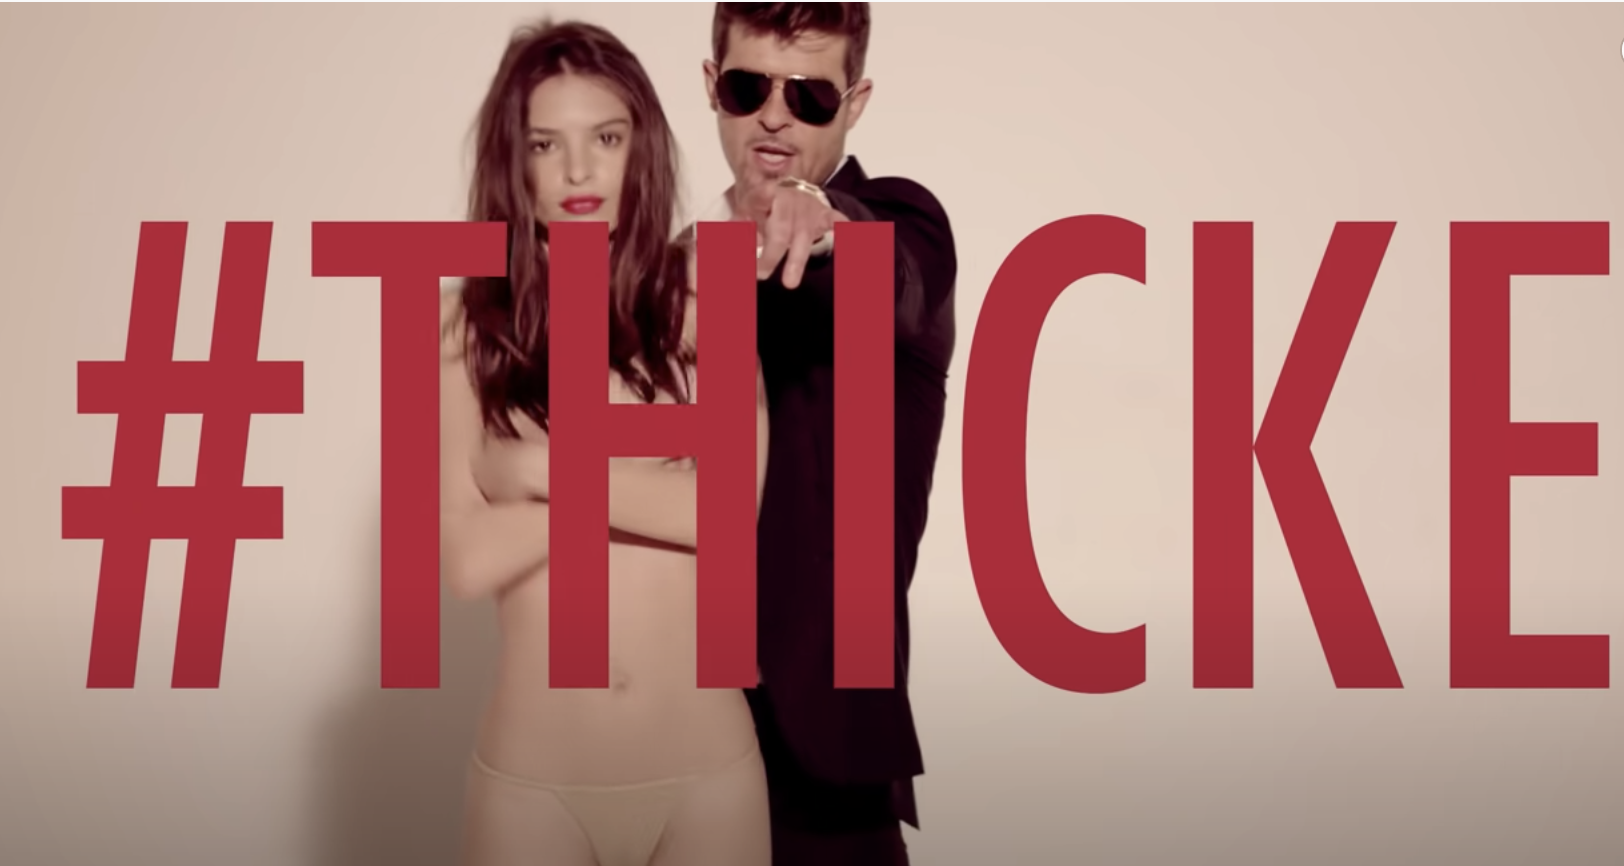 Emily standing with her arms covering her bare breasts as Robin sings behind her with #Thicke written across the screen in a still from the music video